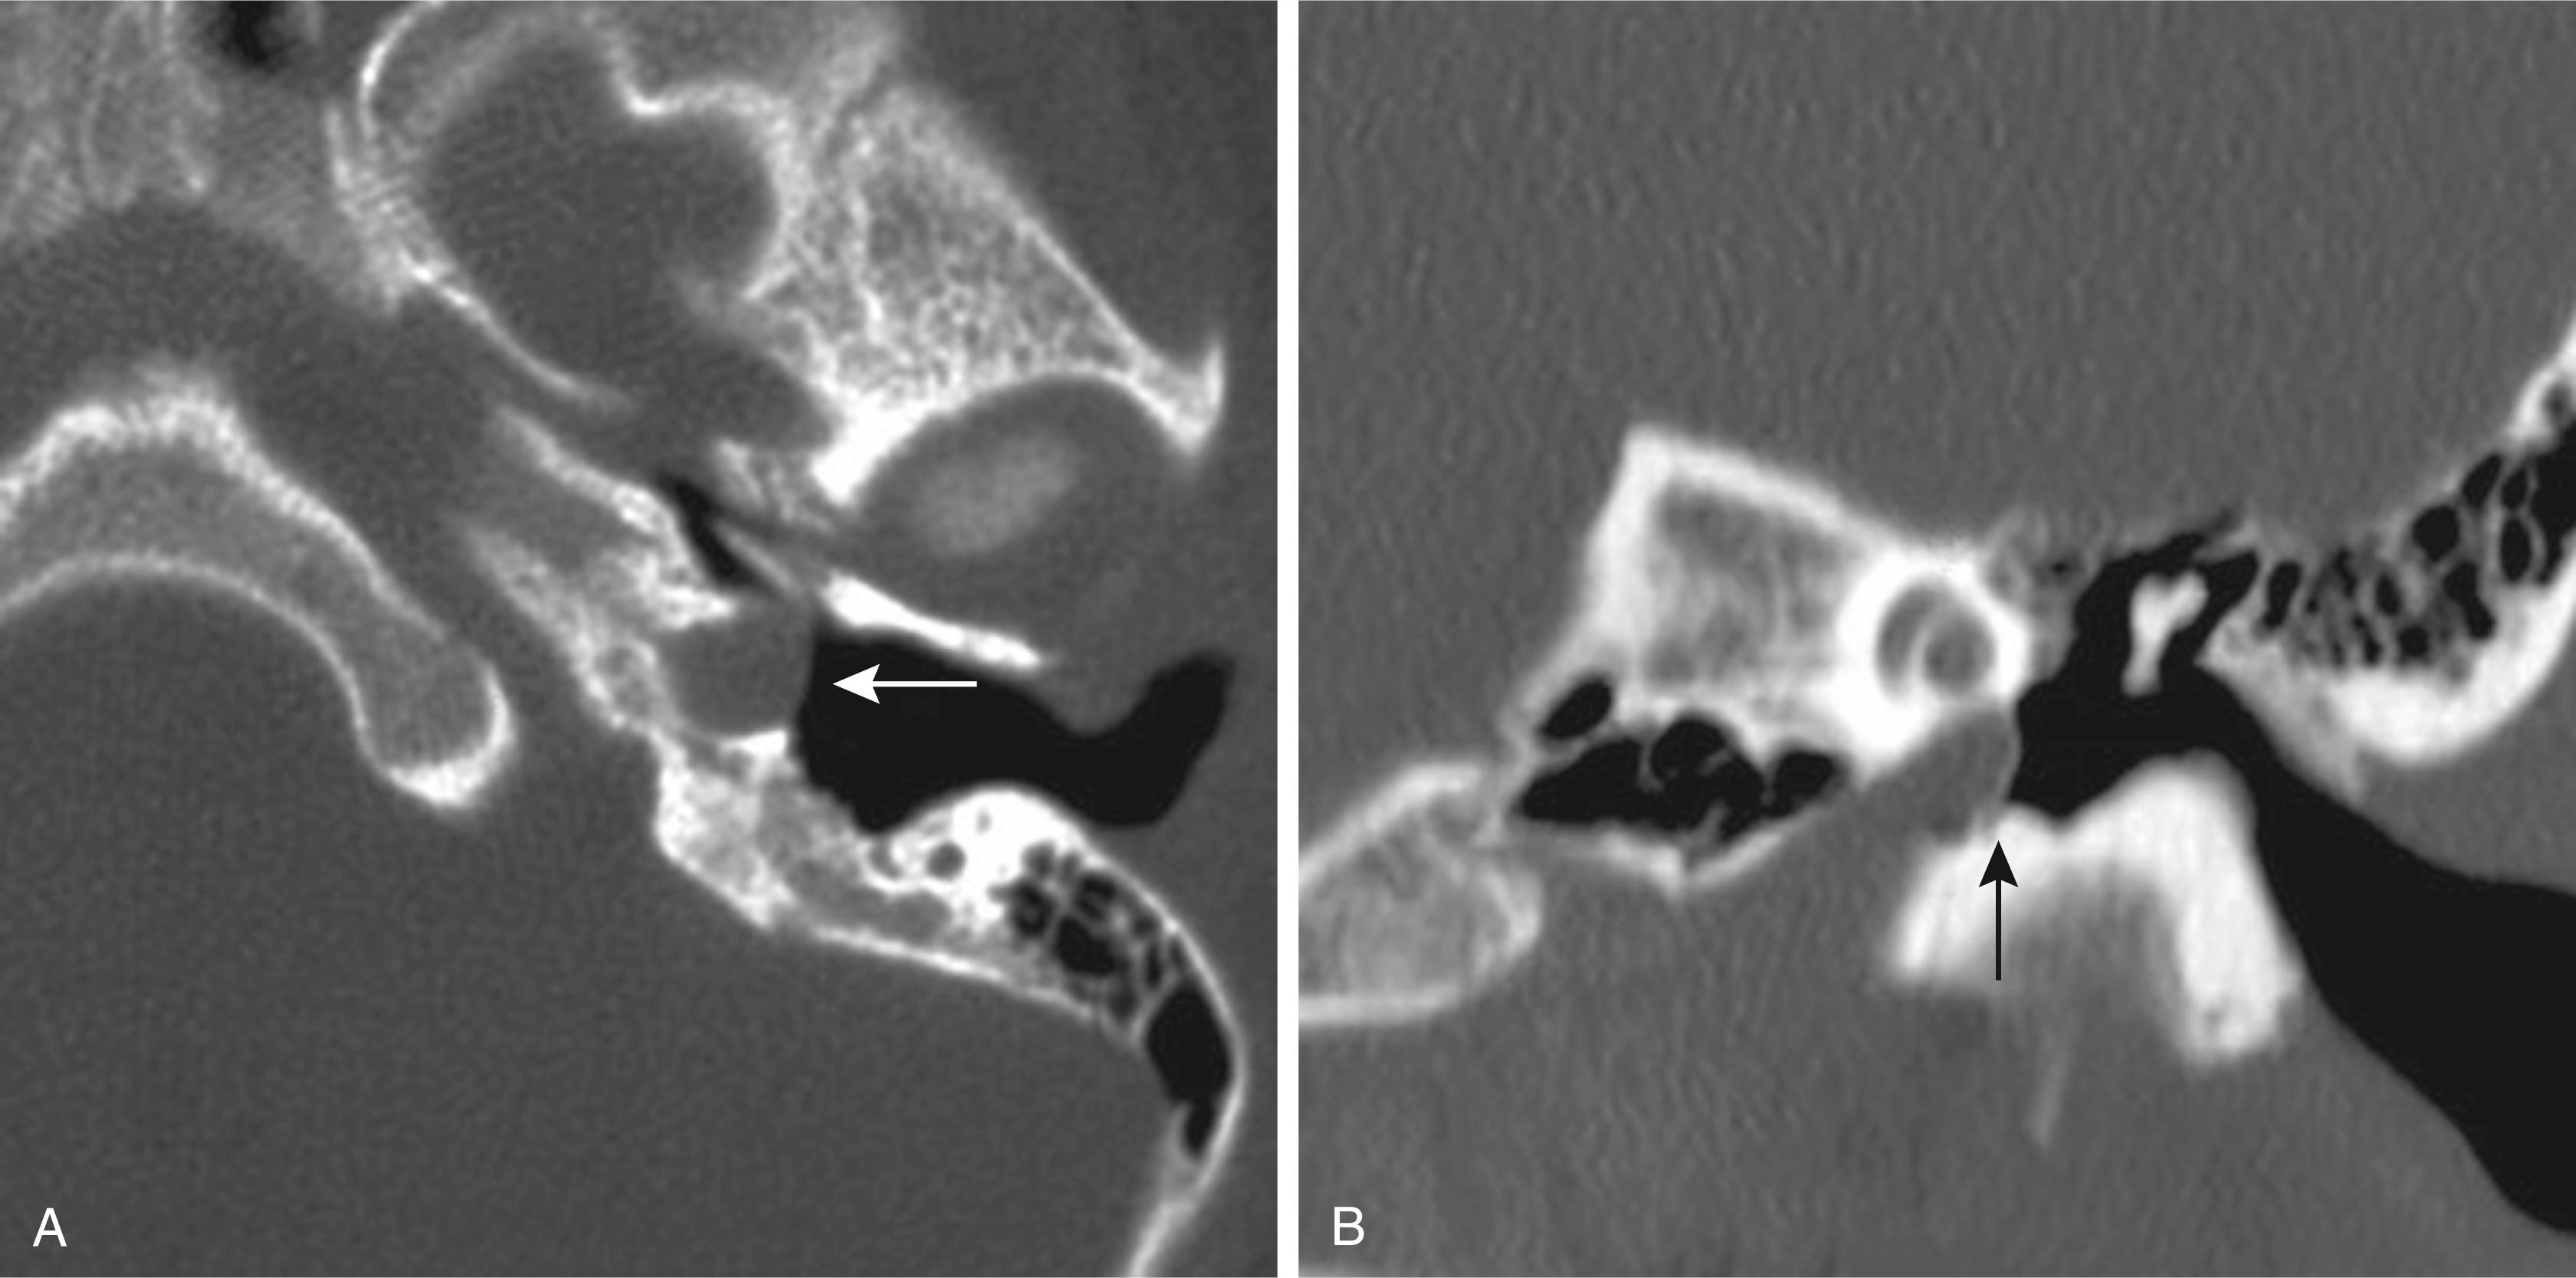 Fig. 60.1, (A) Axial computed tomography (CT) through the left temporal bone shows a distal cervical internal carotid artery (ICA) without a bony covering along the lateral margin ( white arrow ). The artery is protruding into the anteroinferior middle ear. (B) On a coronal CT, the left ICA extends more laterally into the middle ear then the cochlea ( black arrow ).